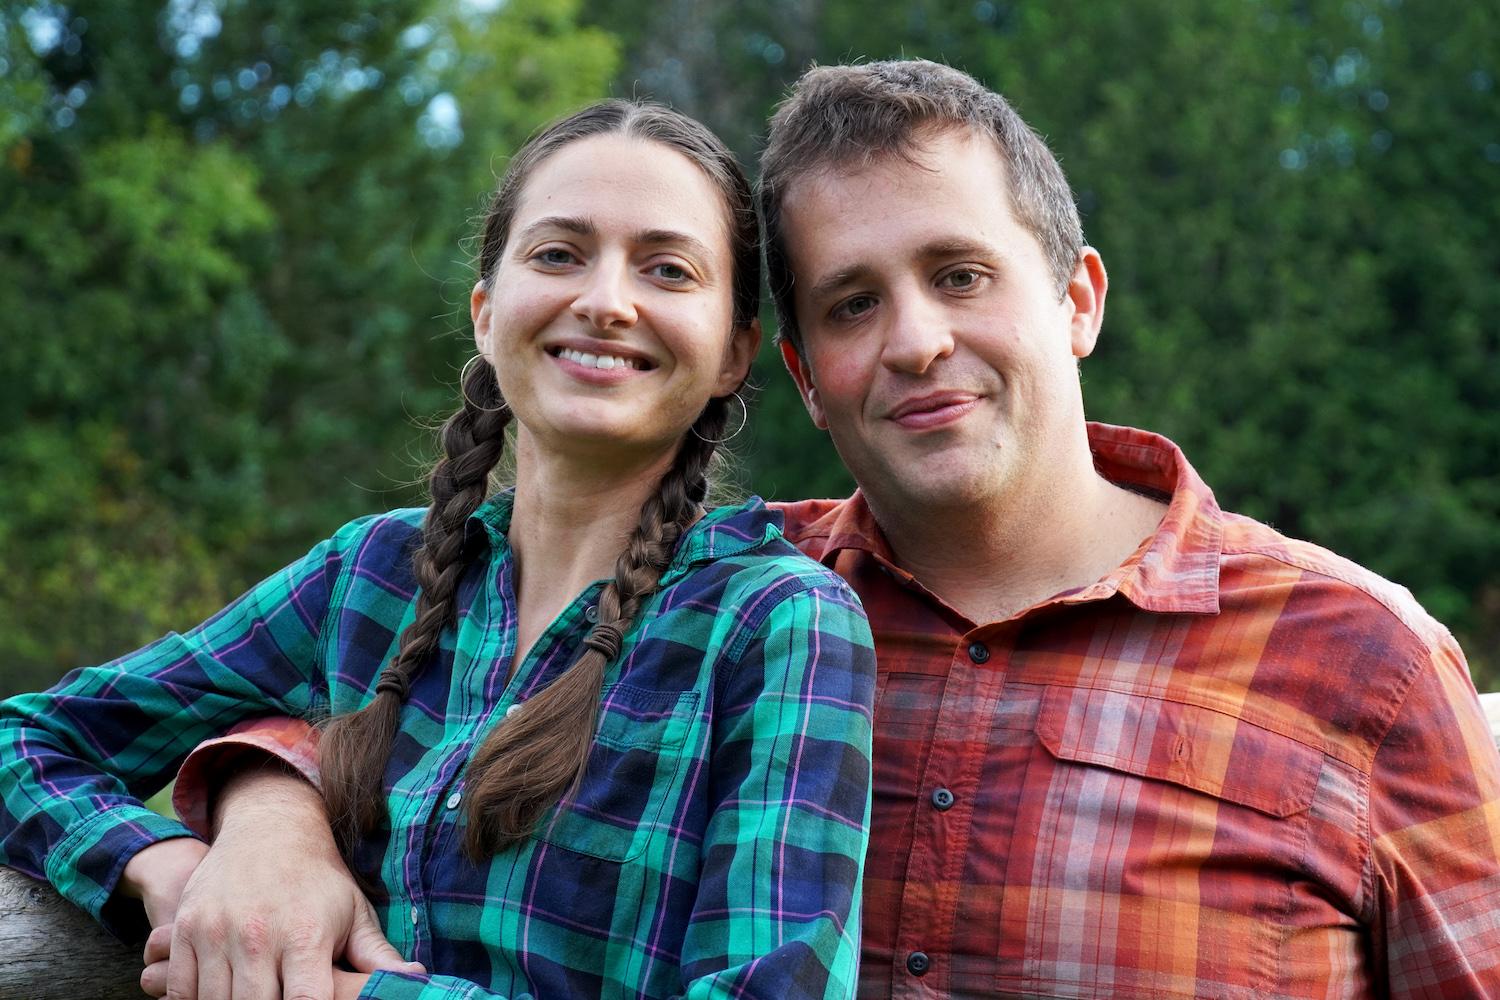 morgan and allison gold - farmers do crowdfunding after flooding in vermont